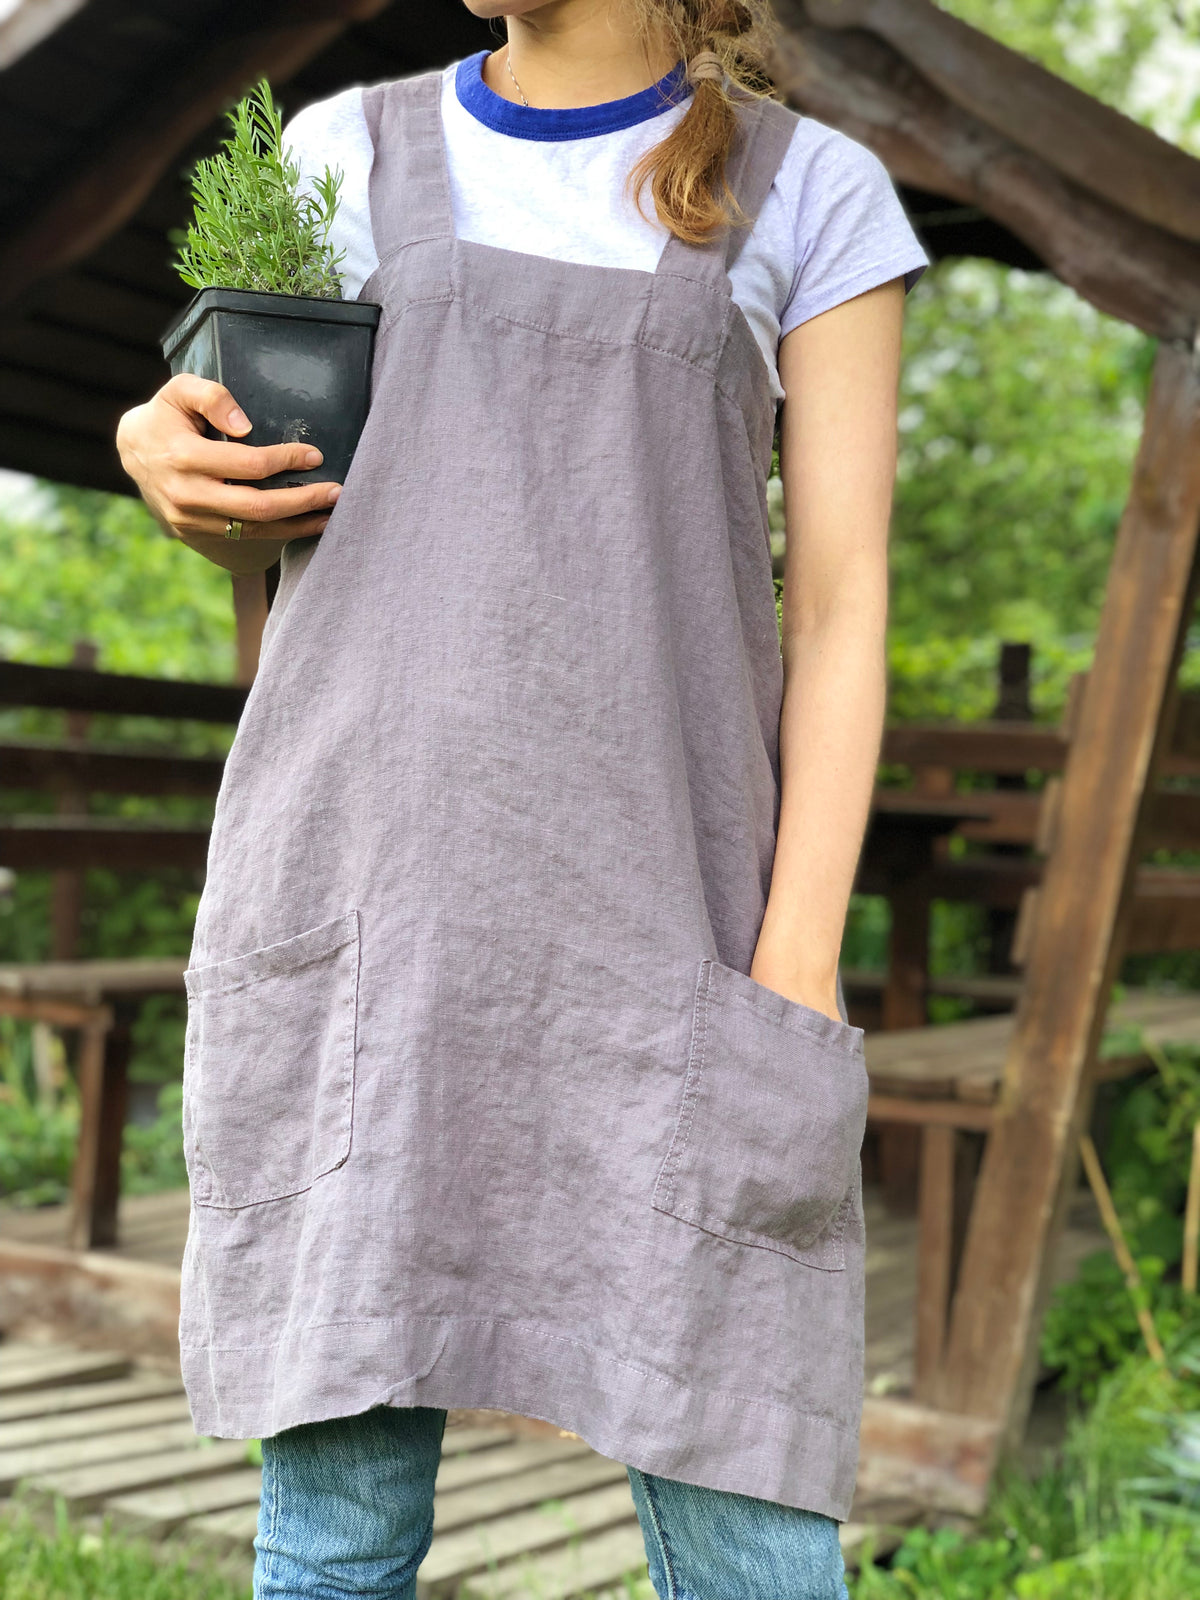 On Sale Linen No-Tie Cross Back Apron with Two Pockets